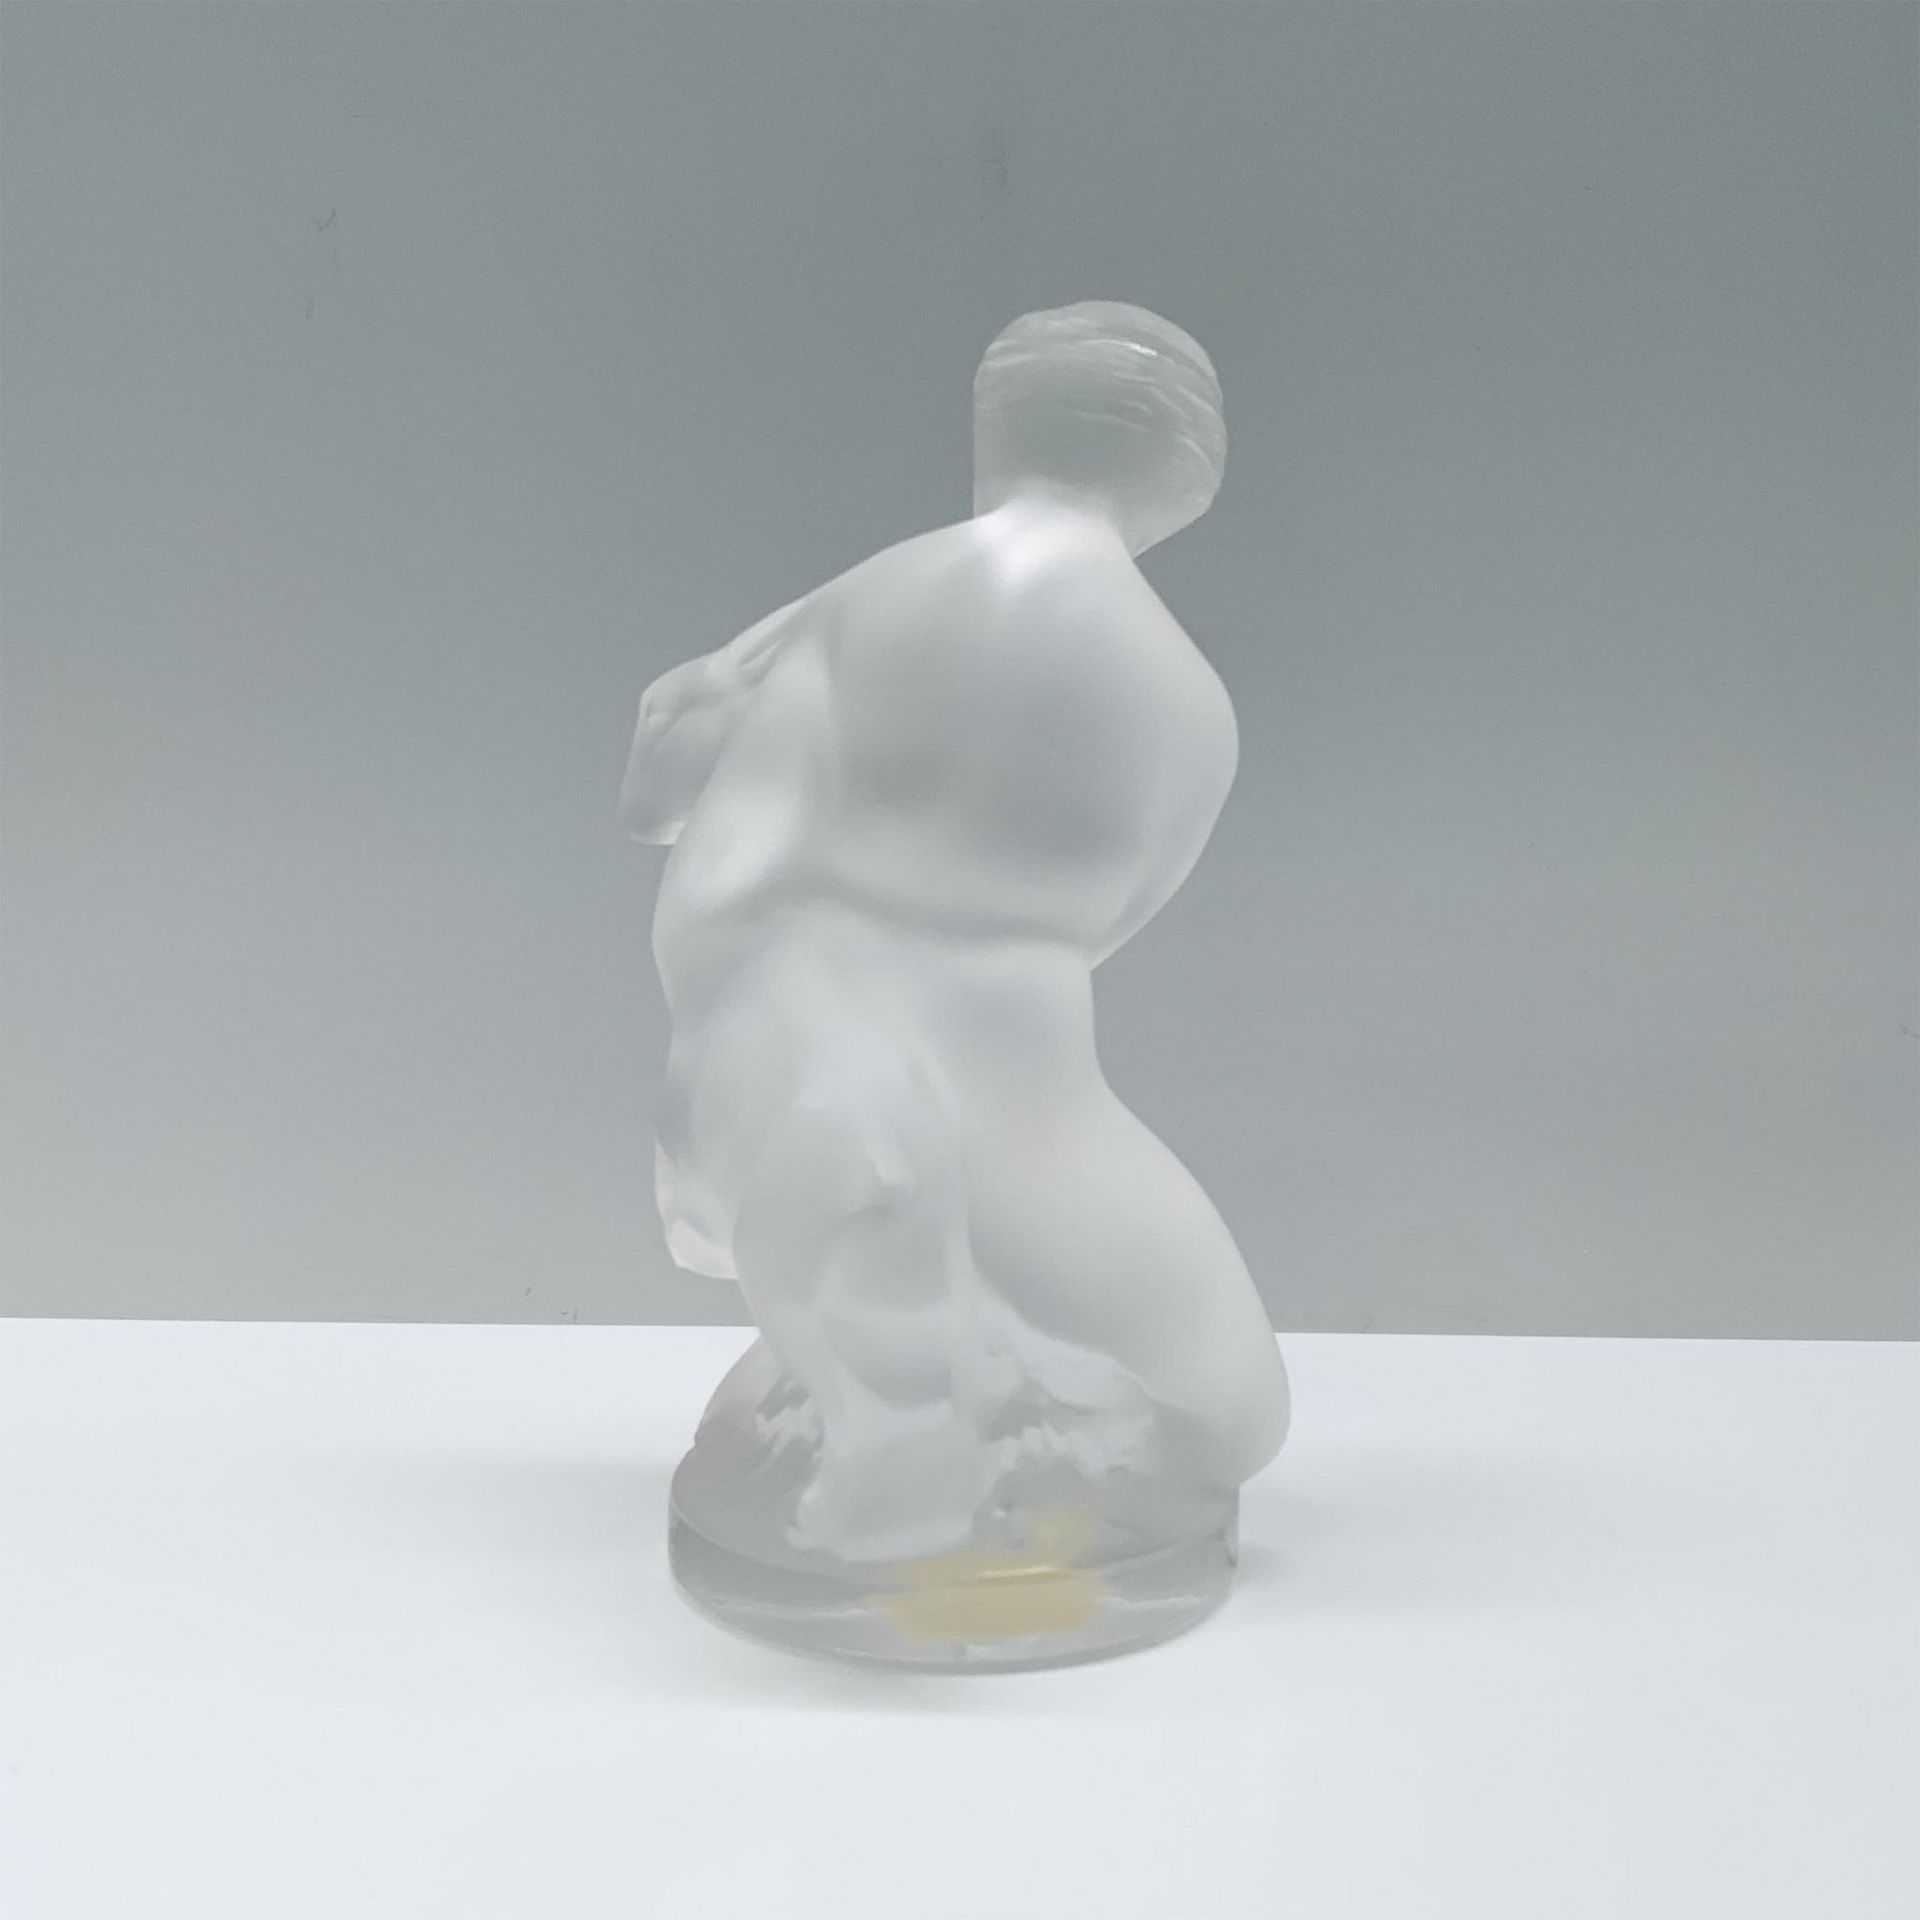 Lalique Crystal Figurine, Diana the Huntress - Image 2 of 3